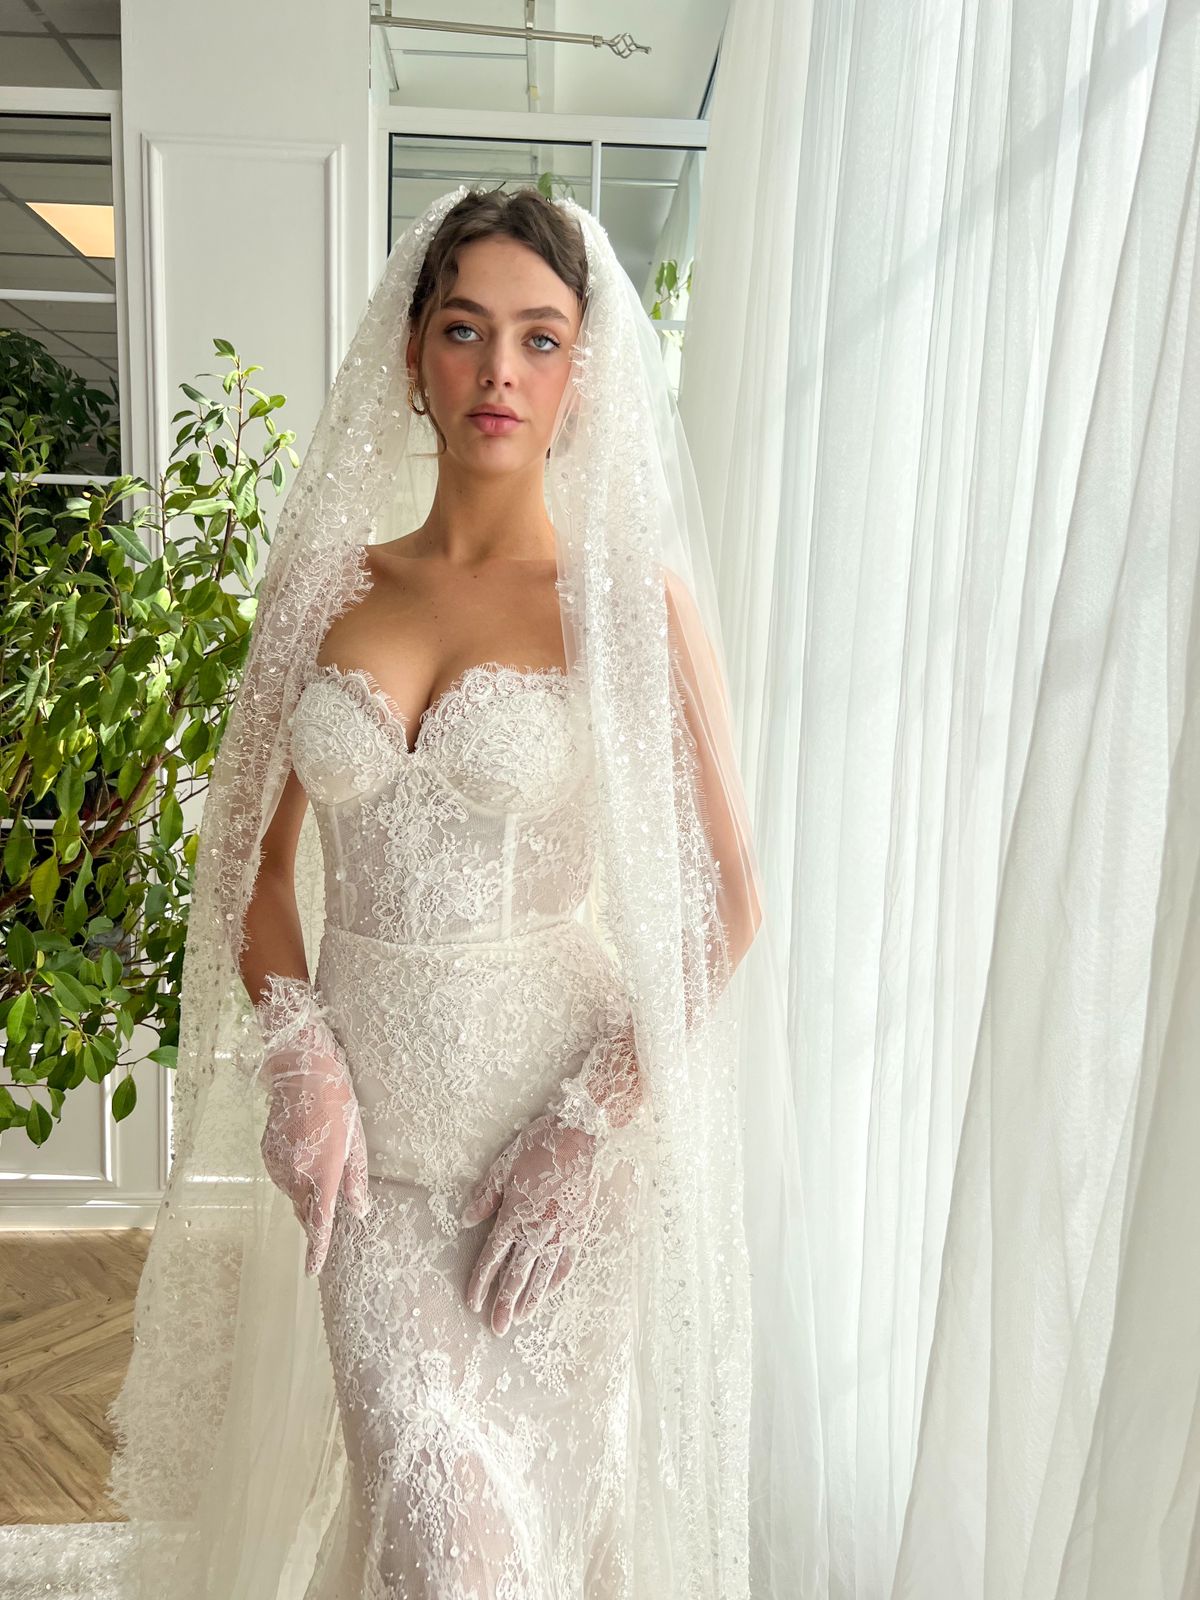 Bridal Gowns | Two Hearts Bridal Studio